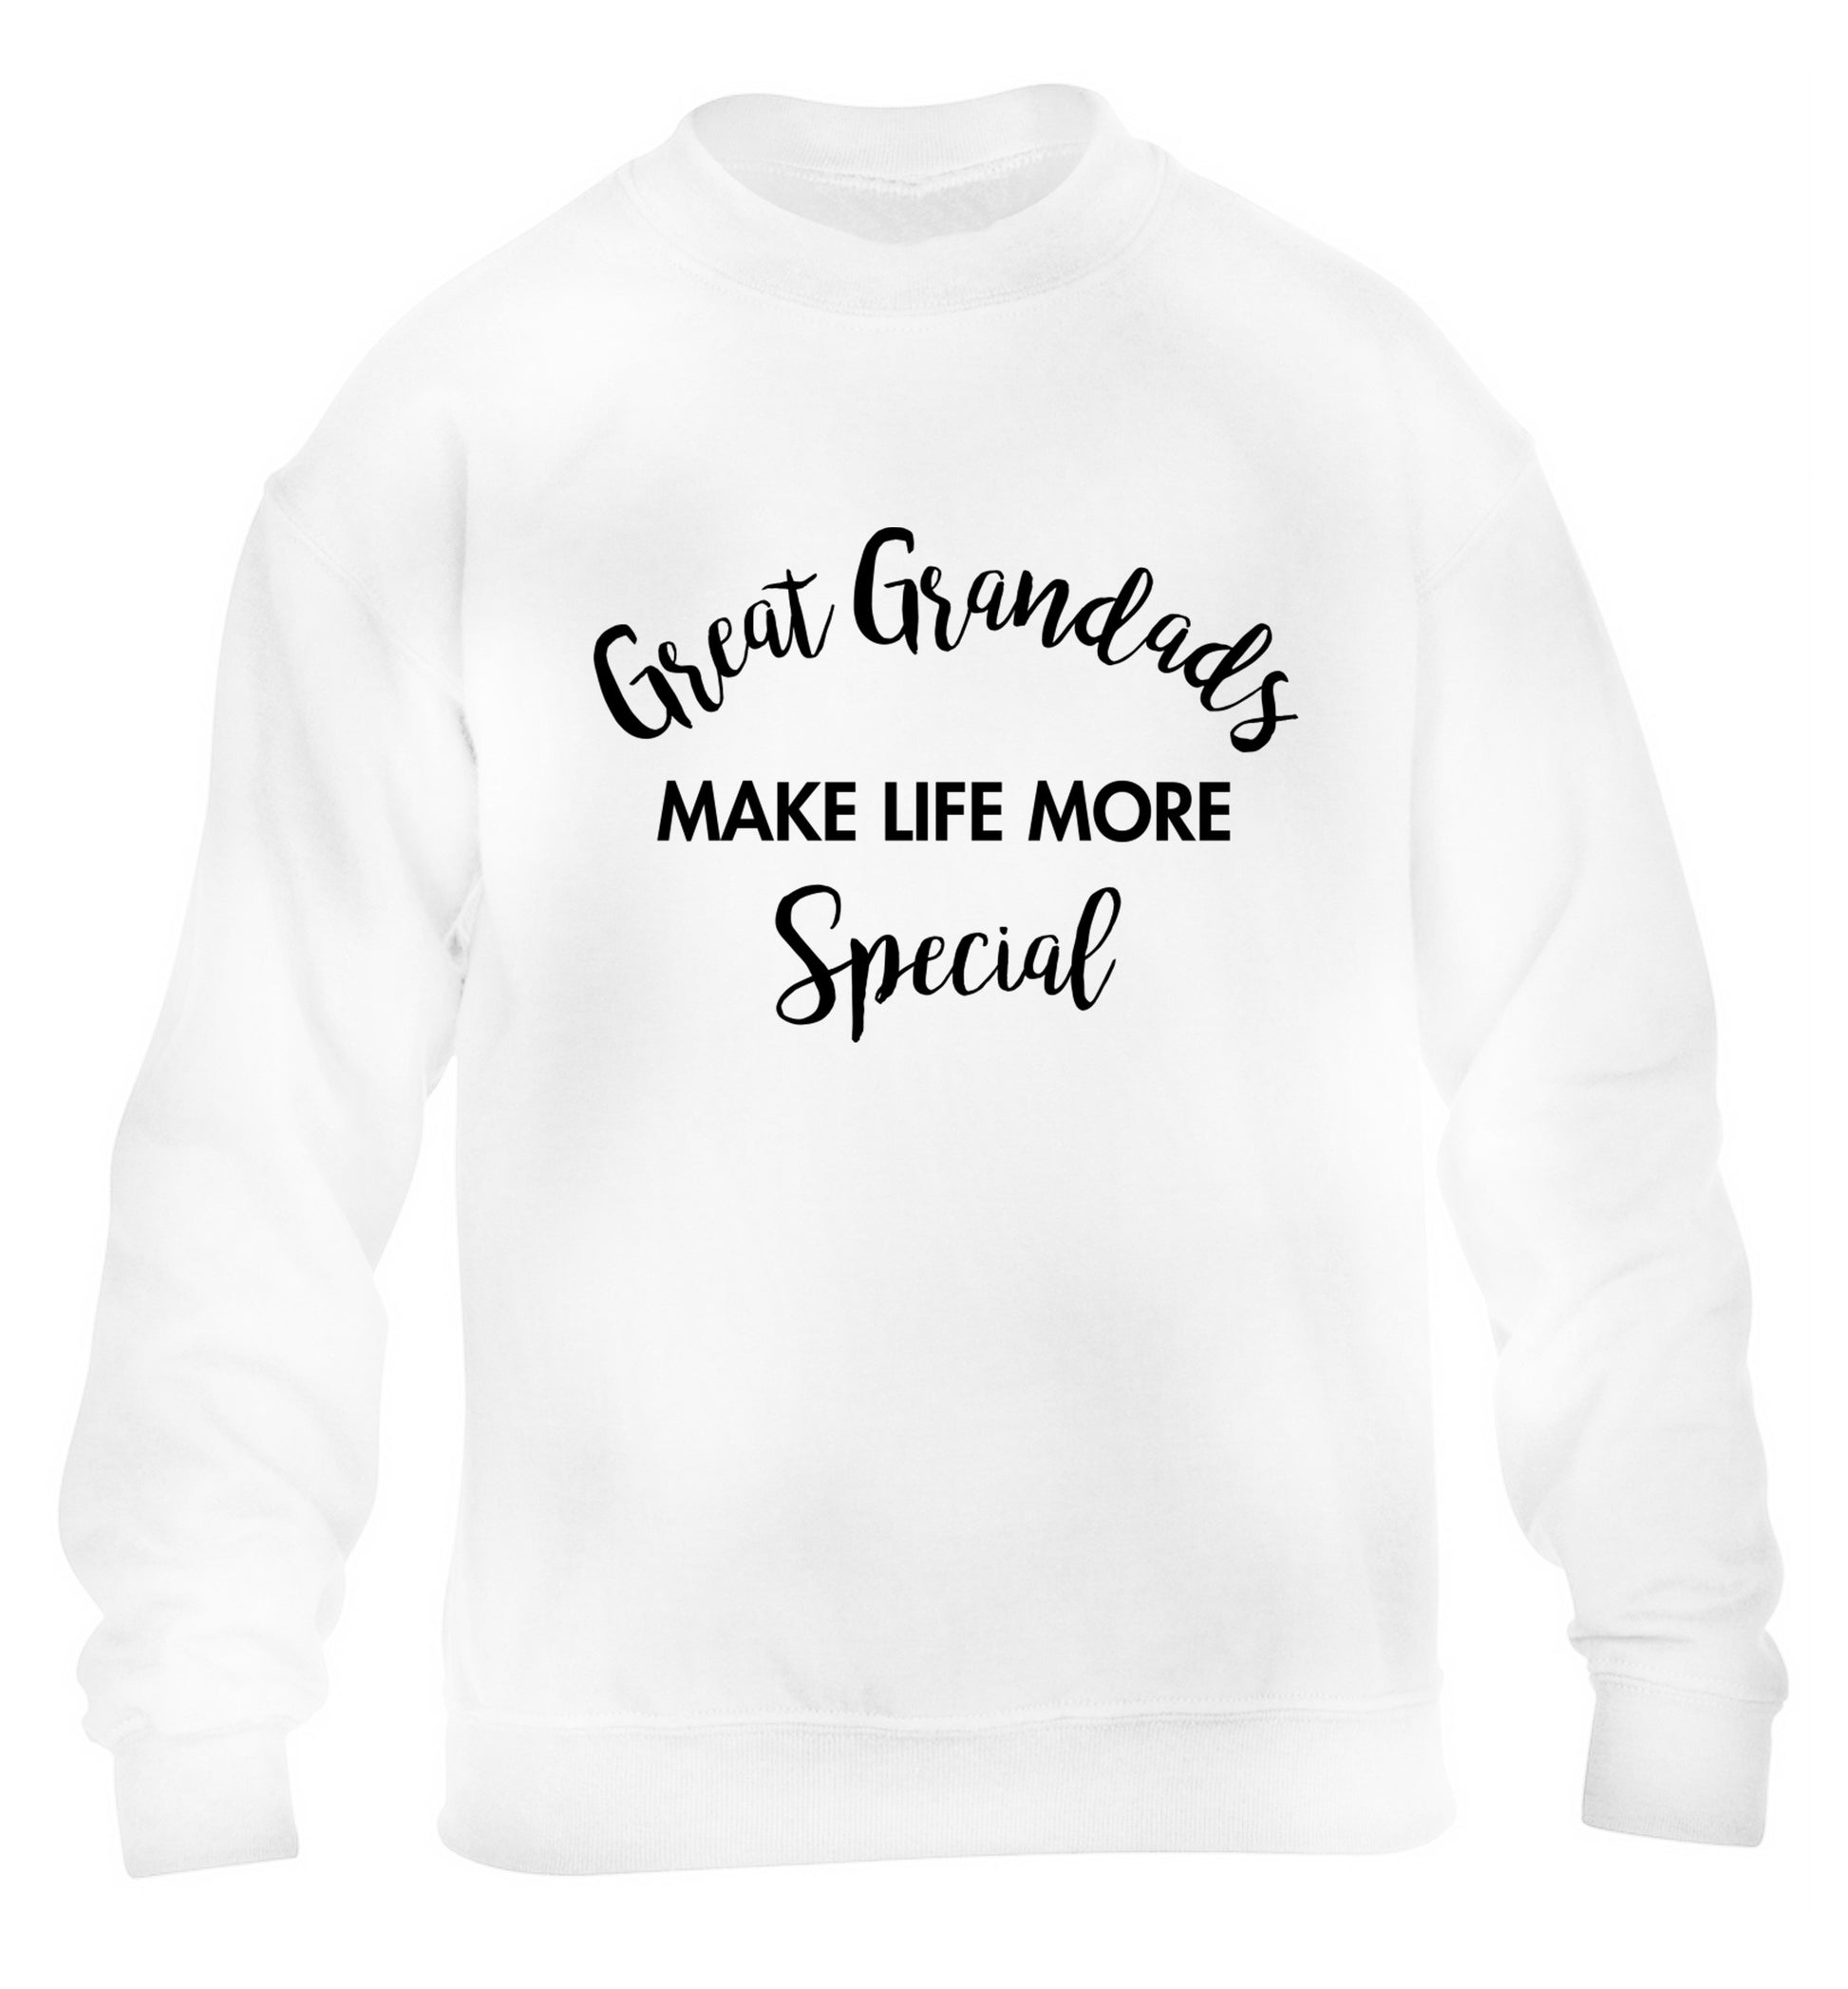 Great Grandads make life more special children's white sweater 12-14 Years